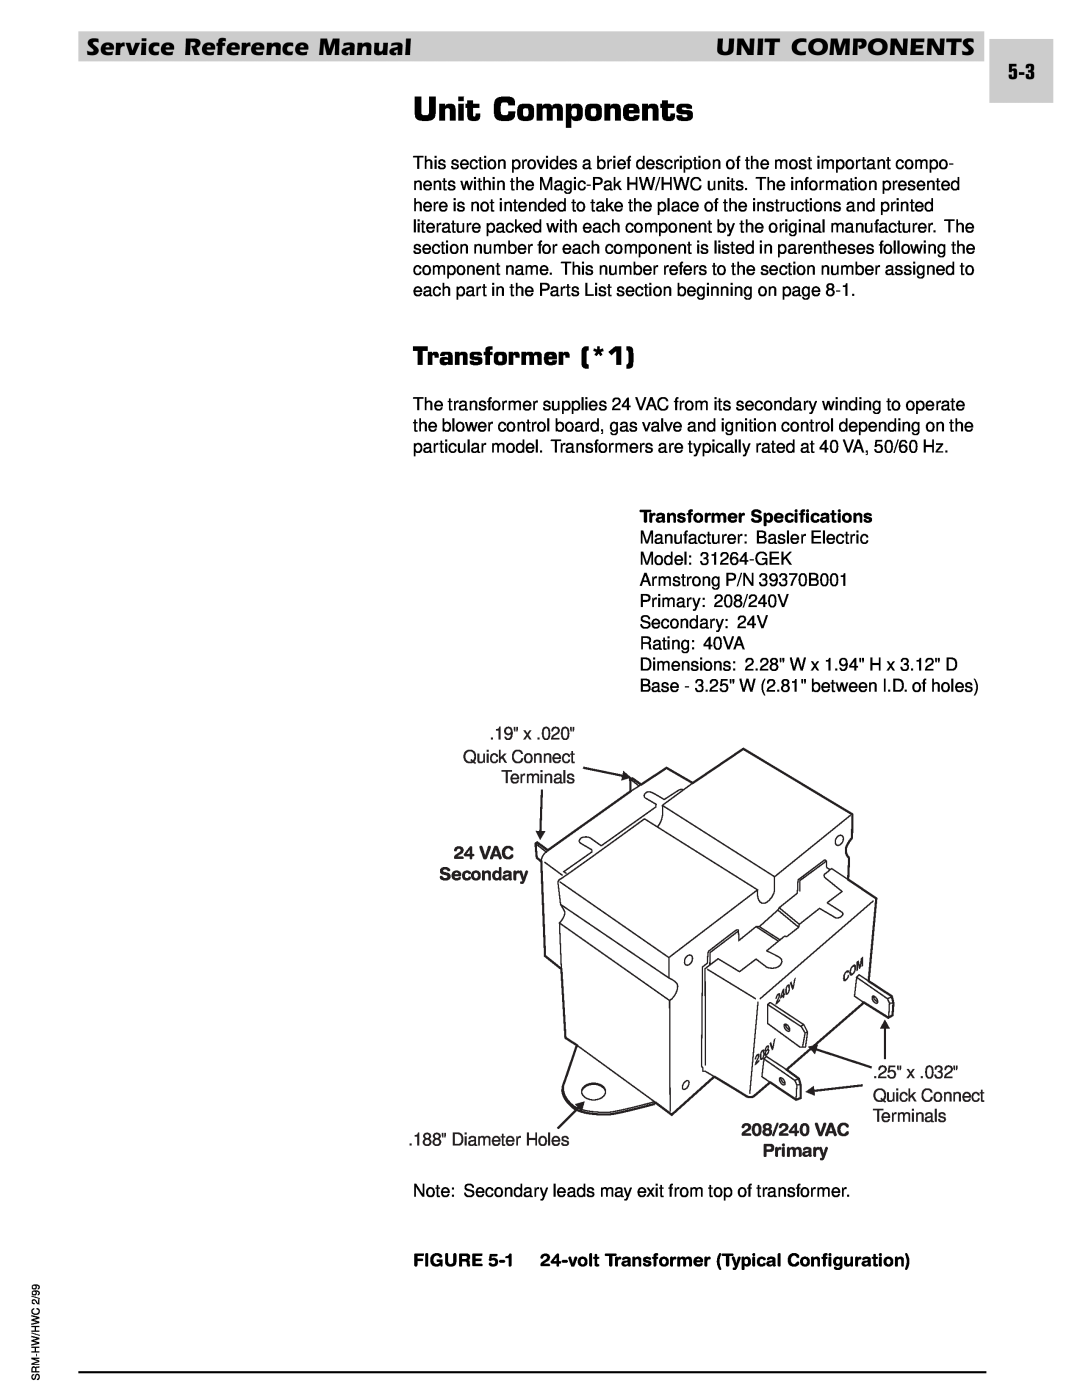 Armstrong World Industries 242, 243, 302 Unit Components, Transformer Specifications, VAC Secondary, 208/240 VAC, Primary 